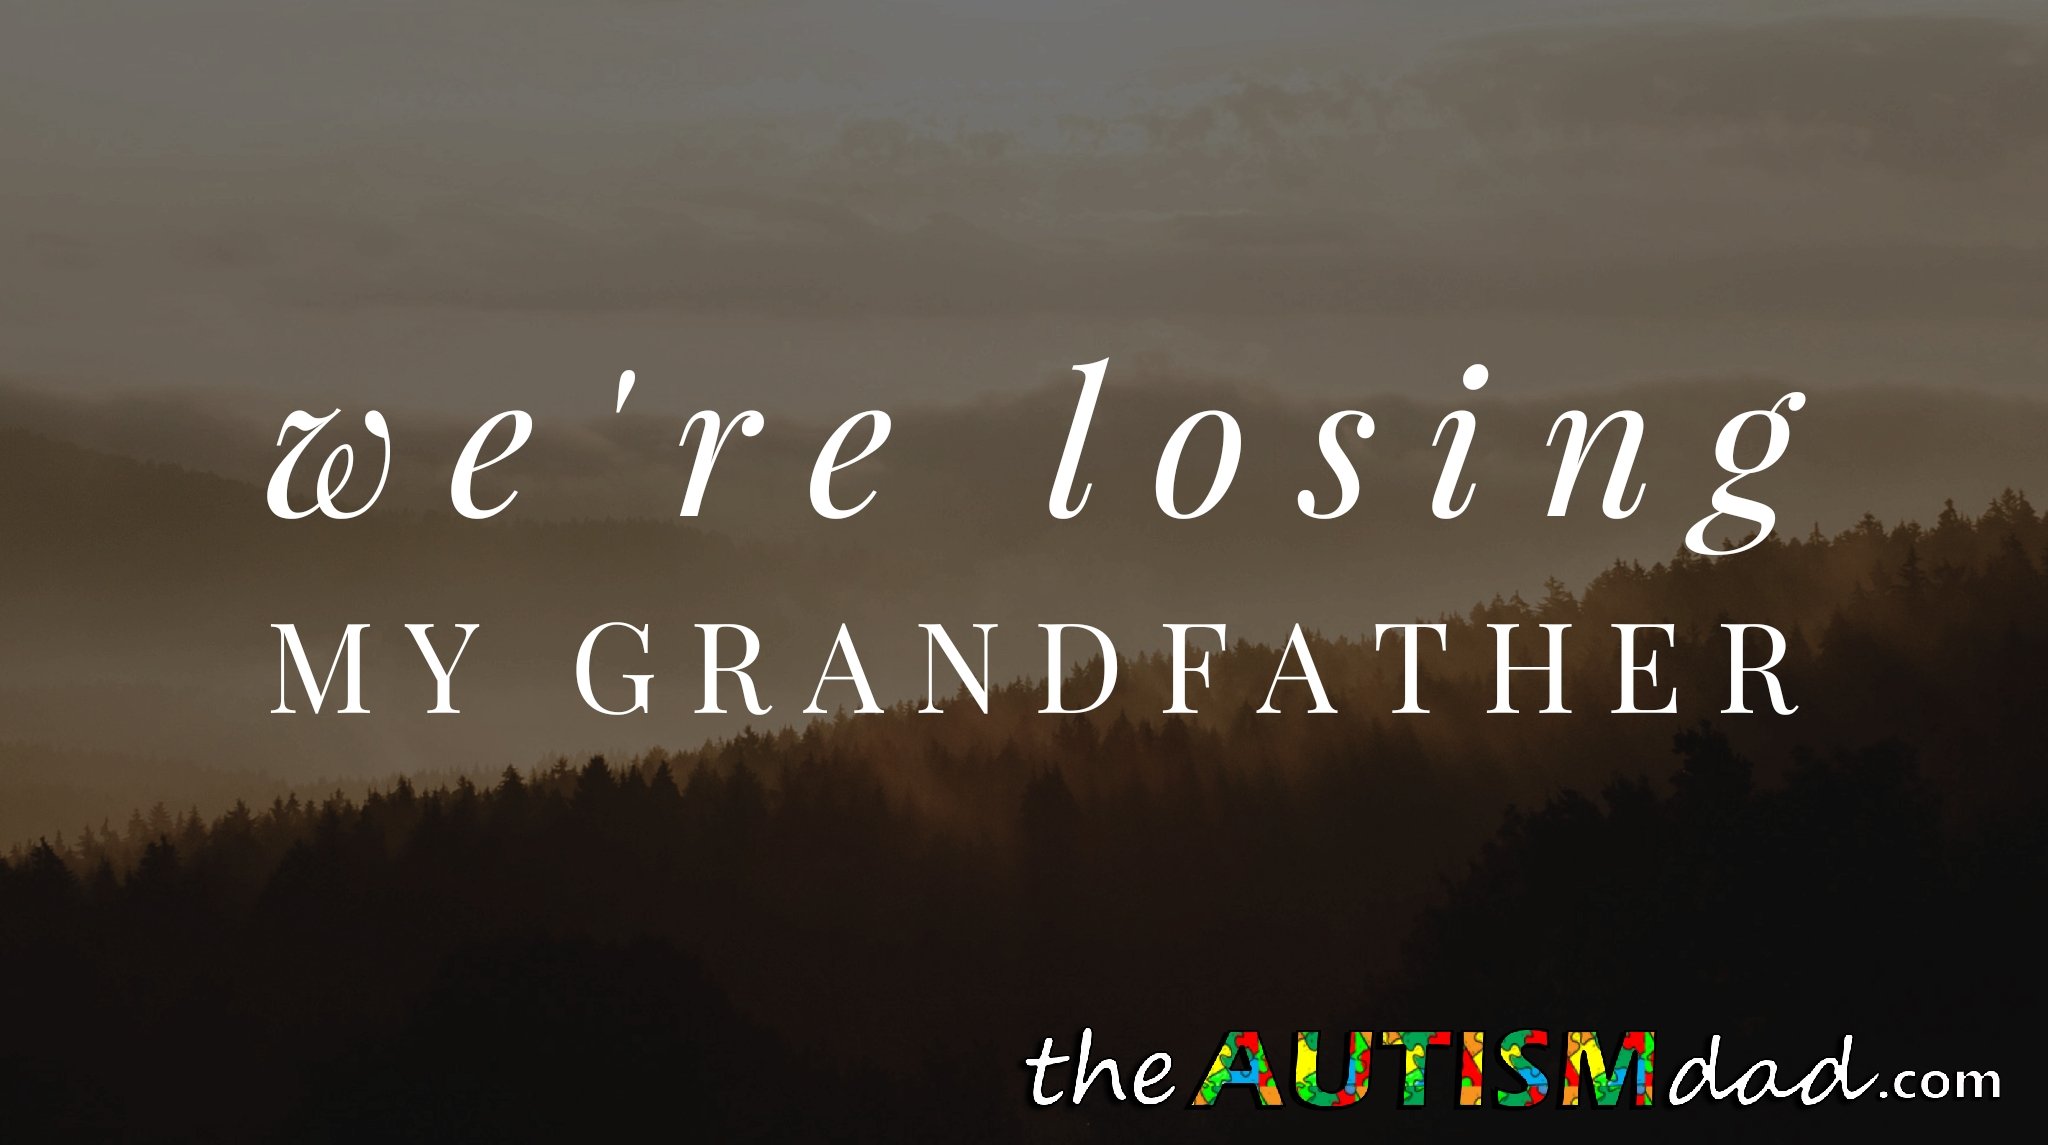 Read more about the article We’re losing my Grandfather